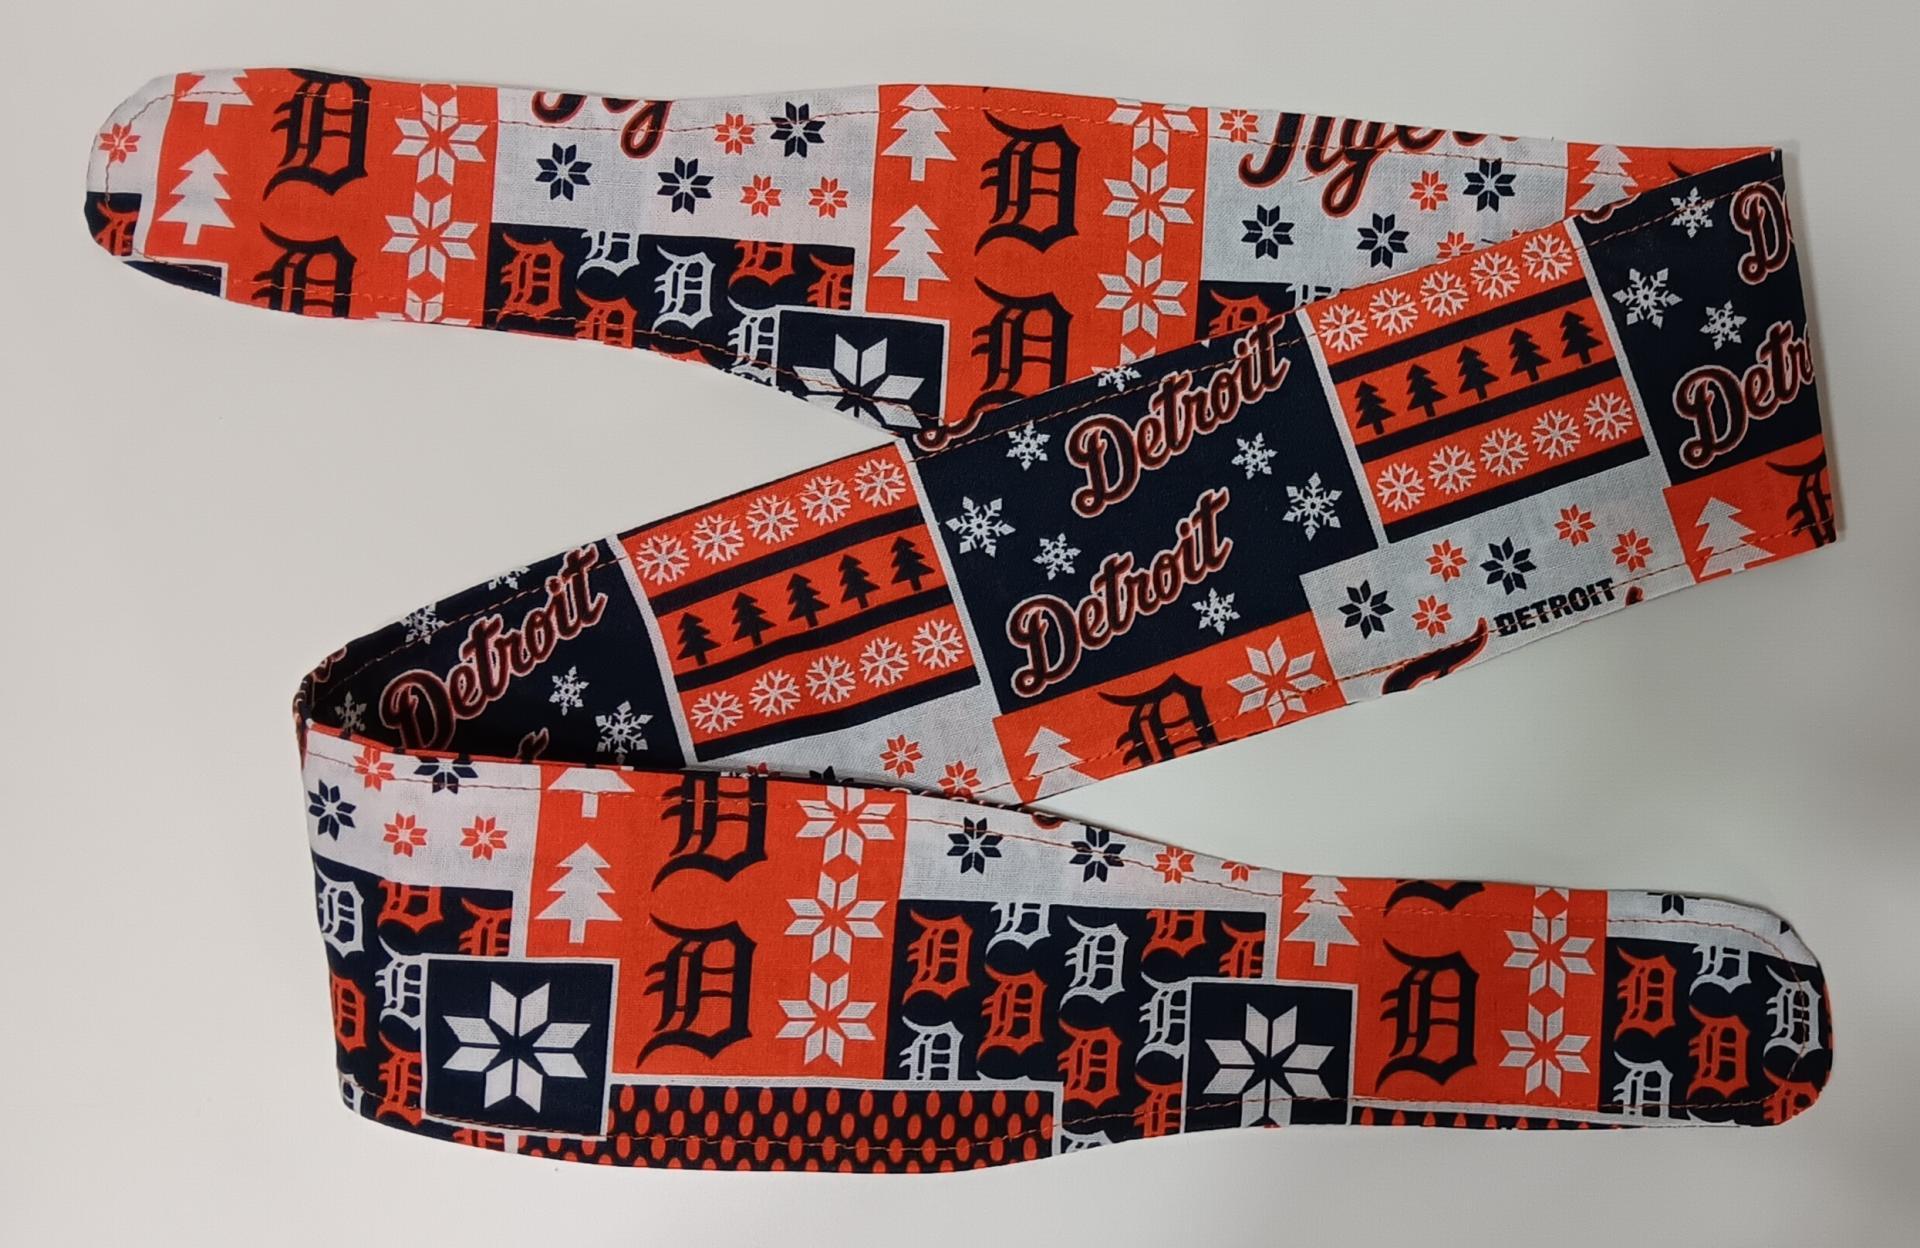 3” Wide Detroit Tigers headband, self-tie, Christmas winter theme, handmade, hair tie, scarf, pin up style, hair wrap, retro style, Old English D